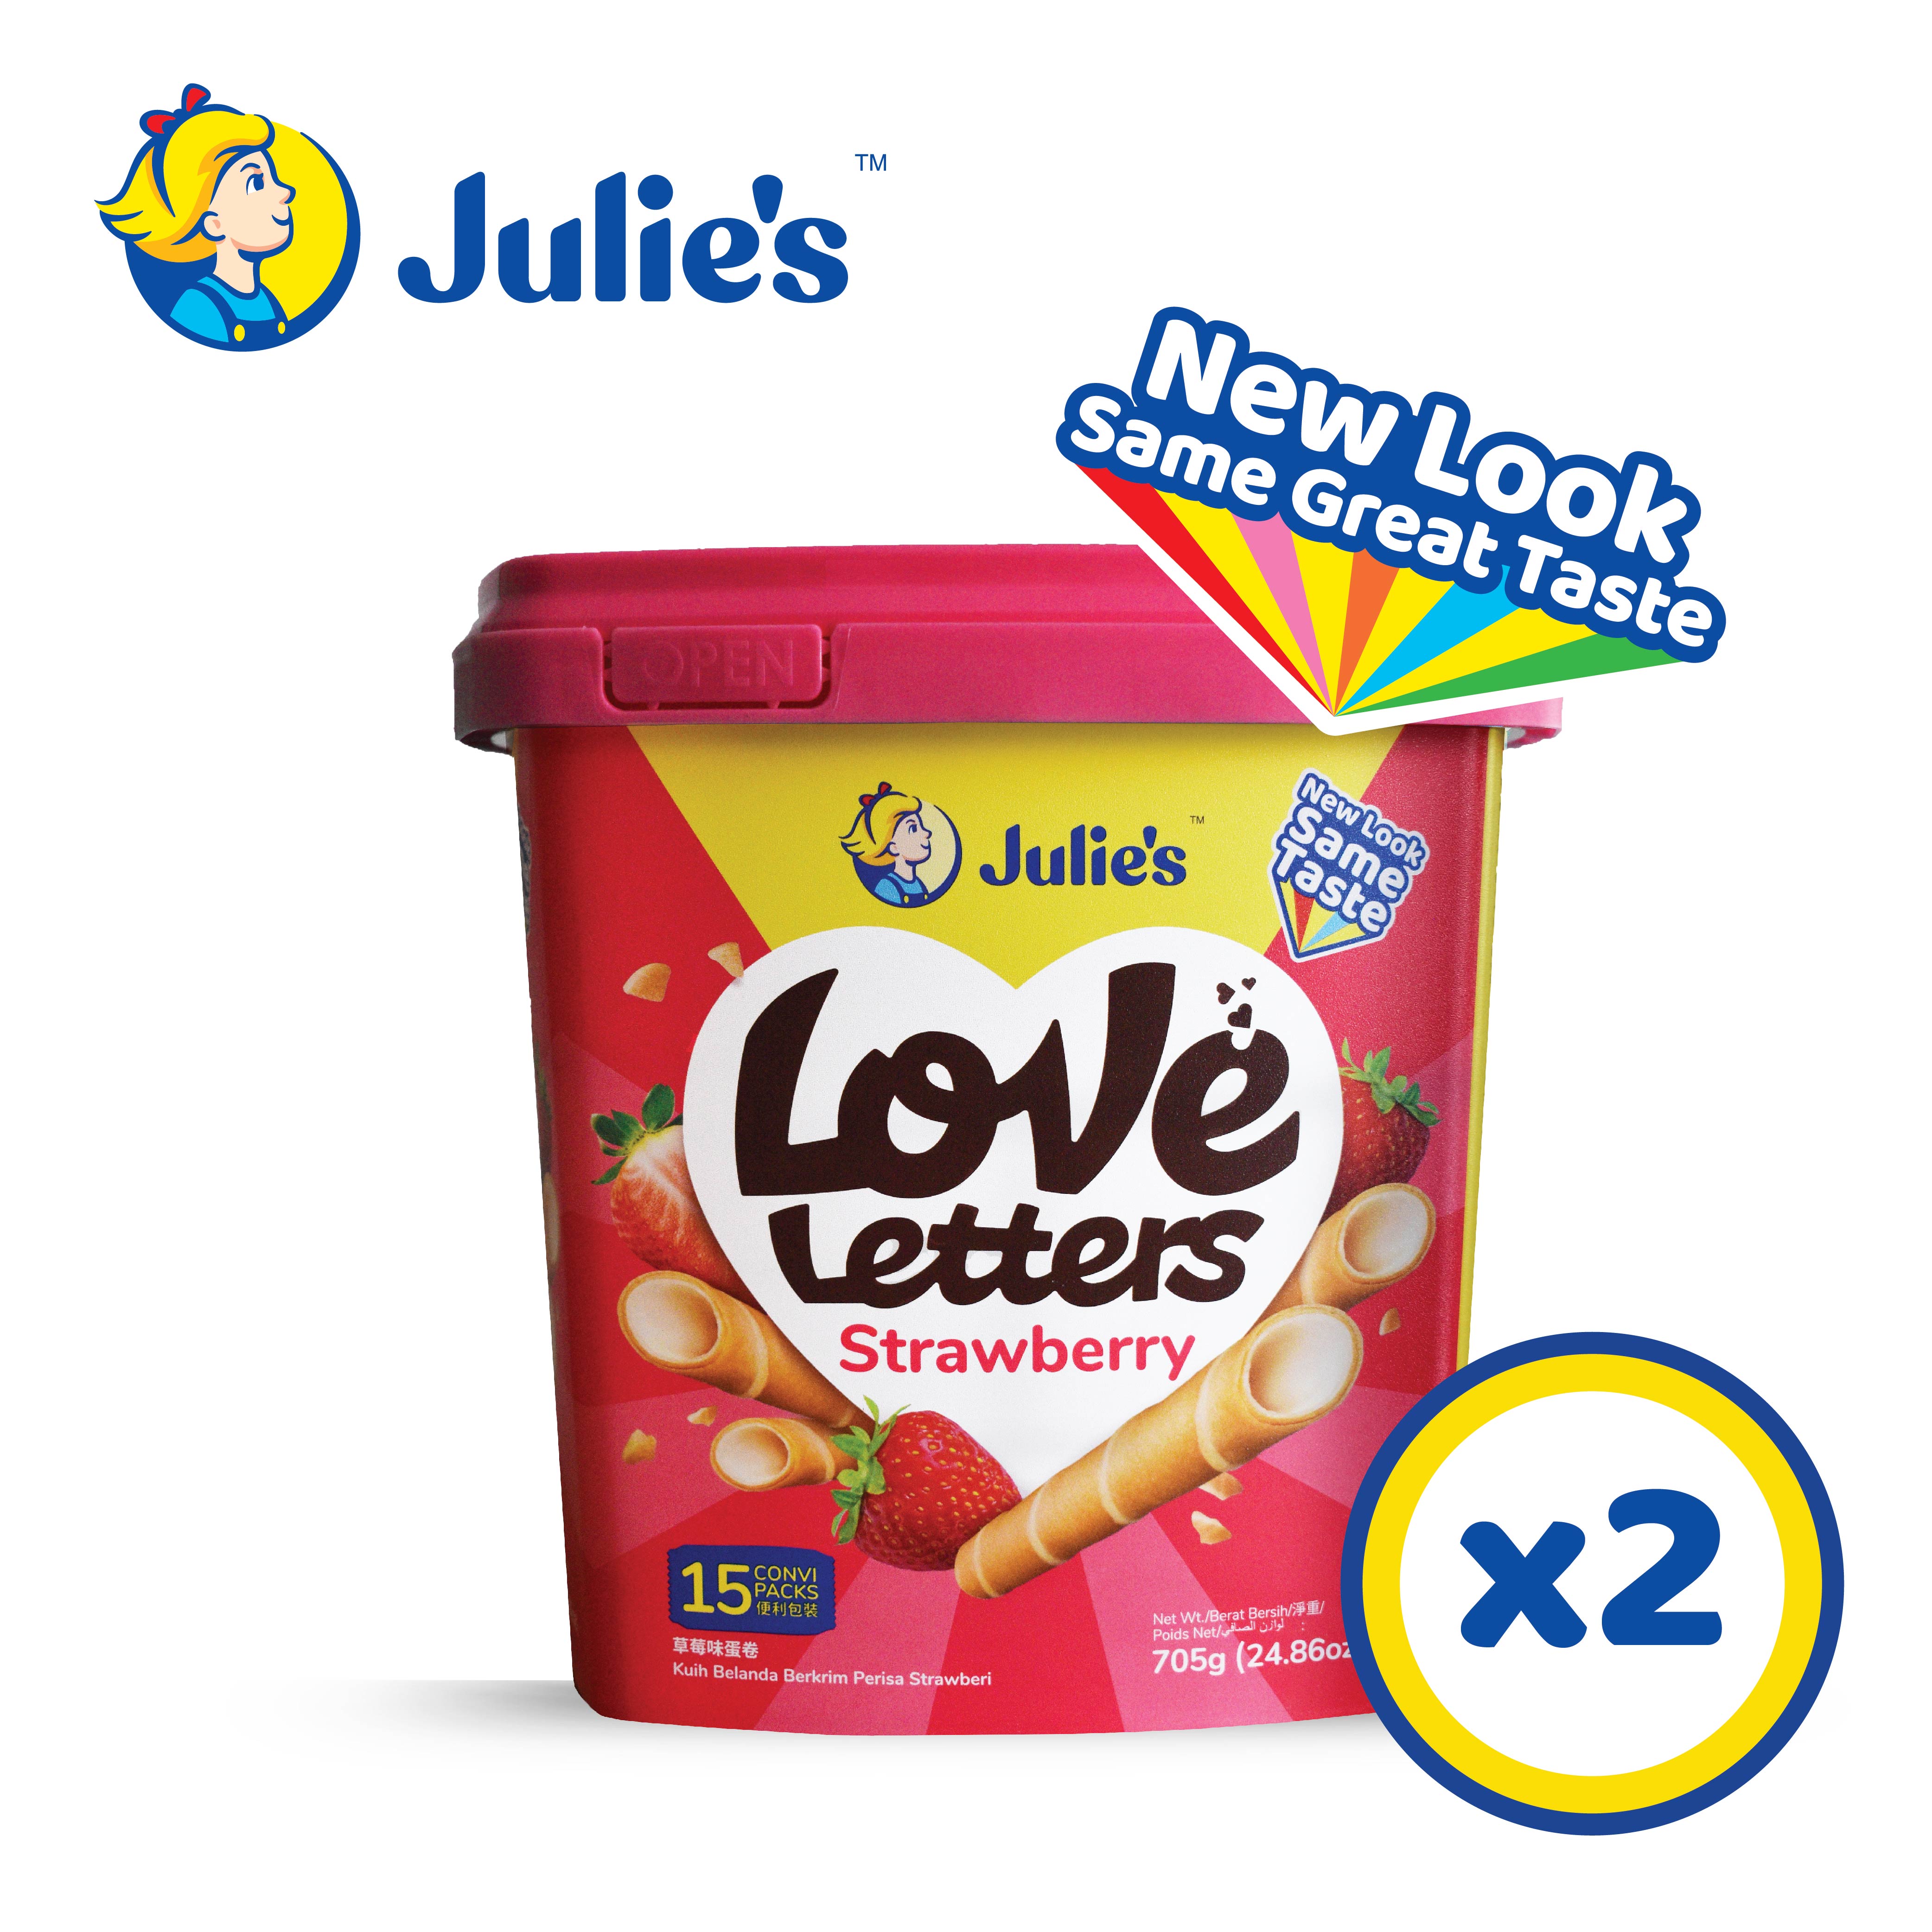 Julie’s Love Letters Strawberry 705g x 2 tubs